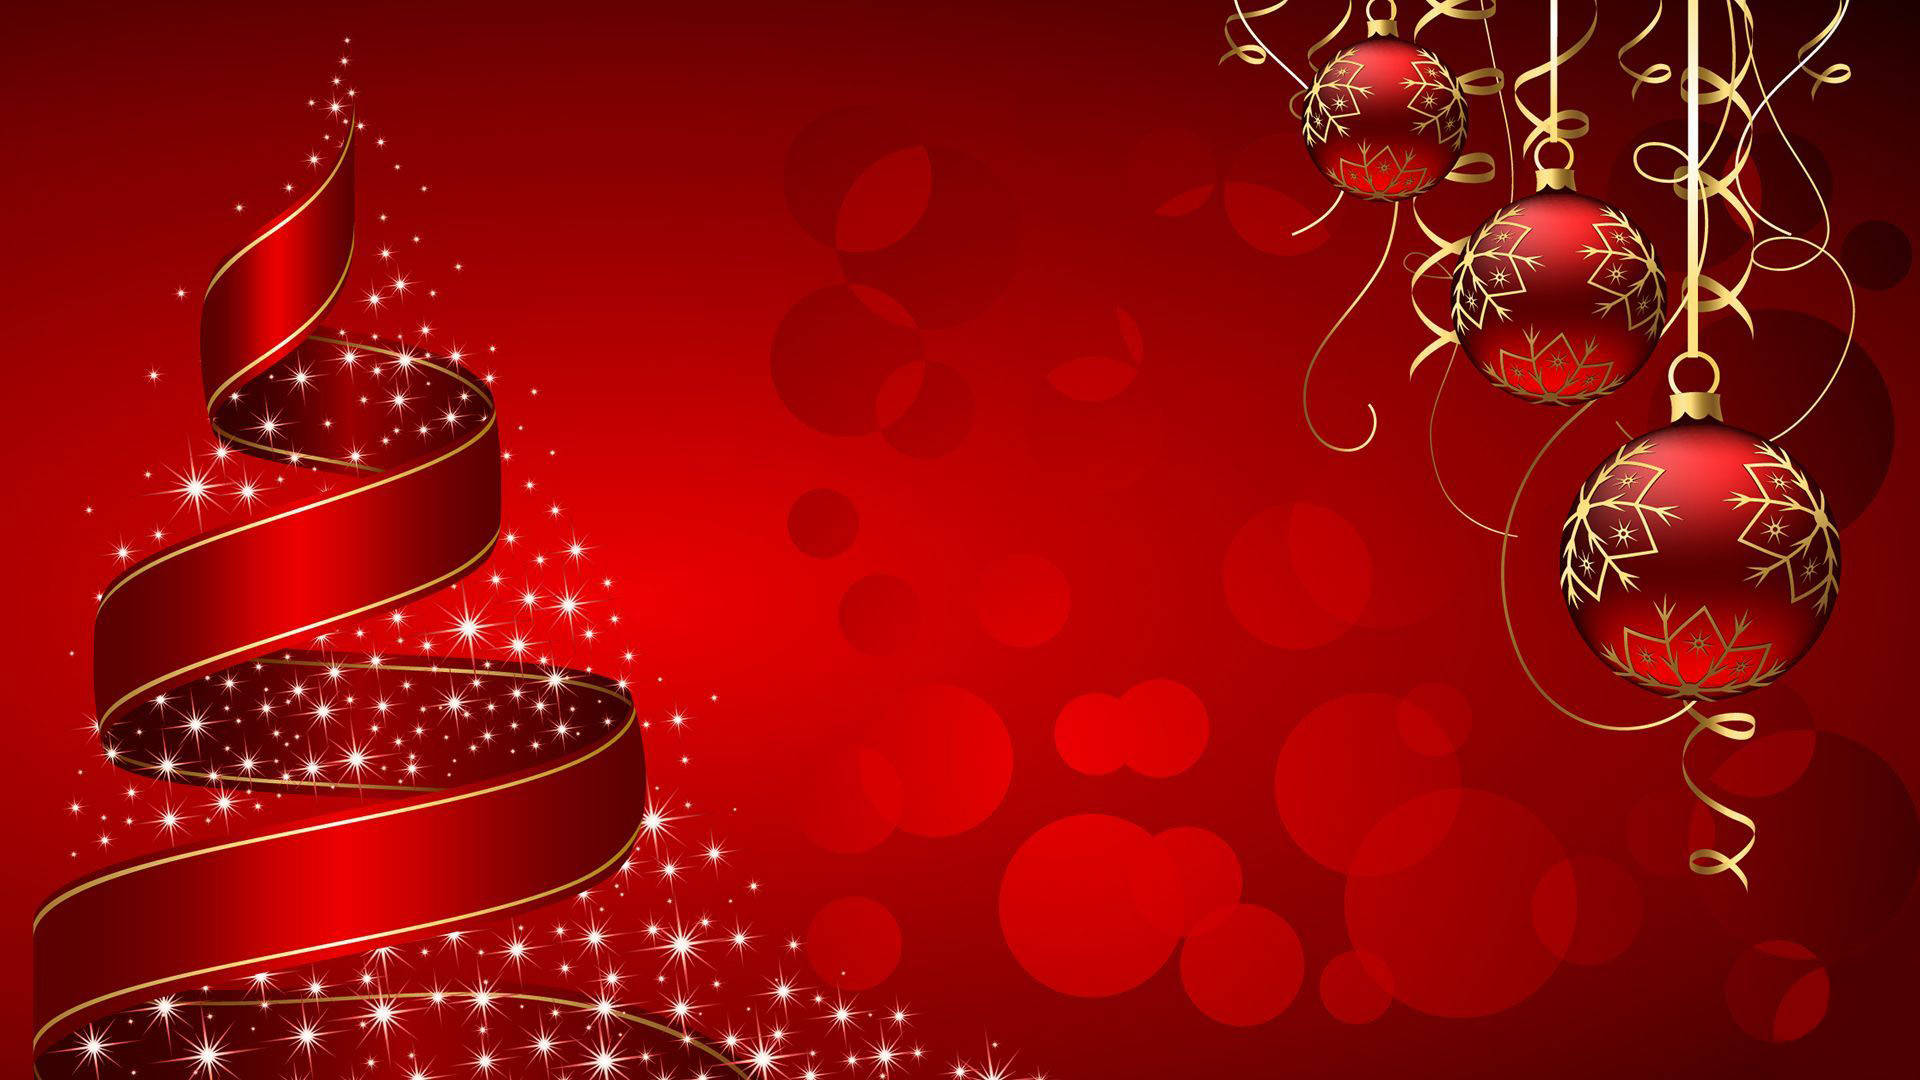 Download Classic Red Christmas Background Wallpaper